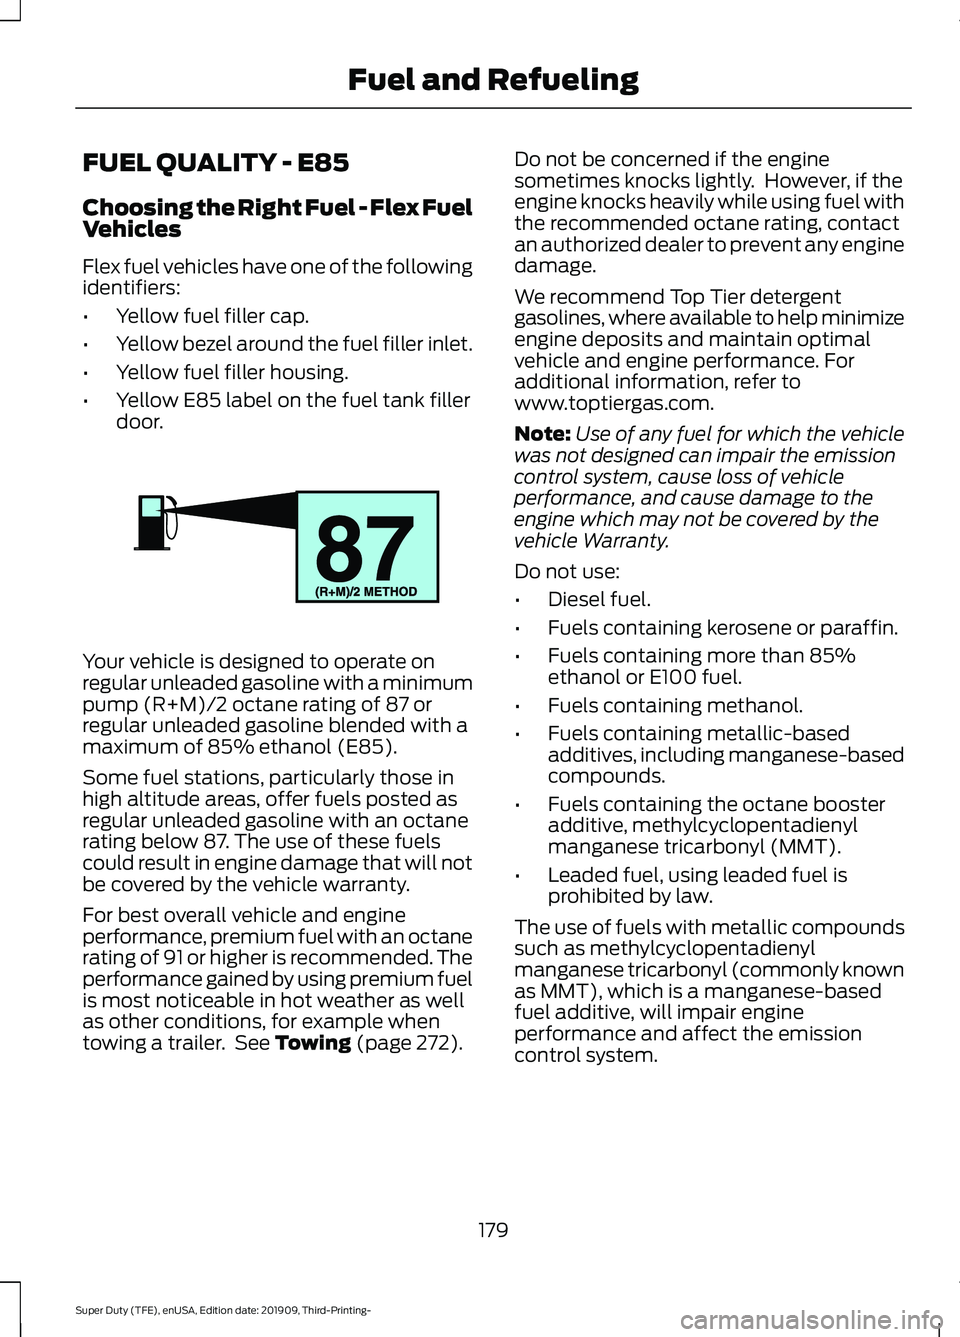 FORD F-550 2020  Owners Manual FUEL QUALITY - E85
Choosing the Right Fuel - Flex Fuel
Vehicles
Flex fuel vehicles have one of the following
identifiers:
•
Yellow fuel filler cap.
• Yellow bezel around the fuel filler inlet.
•